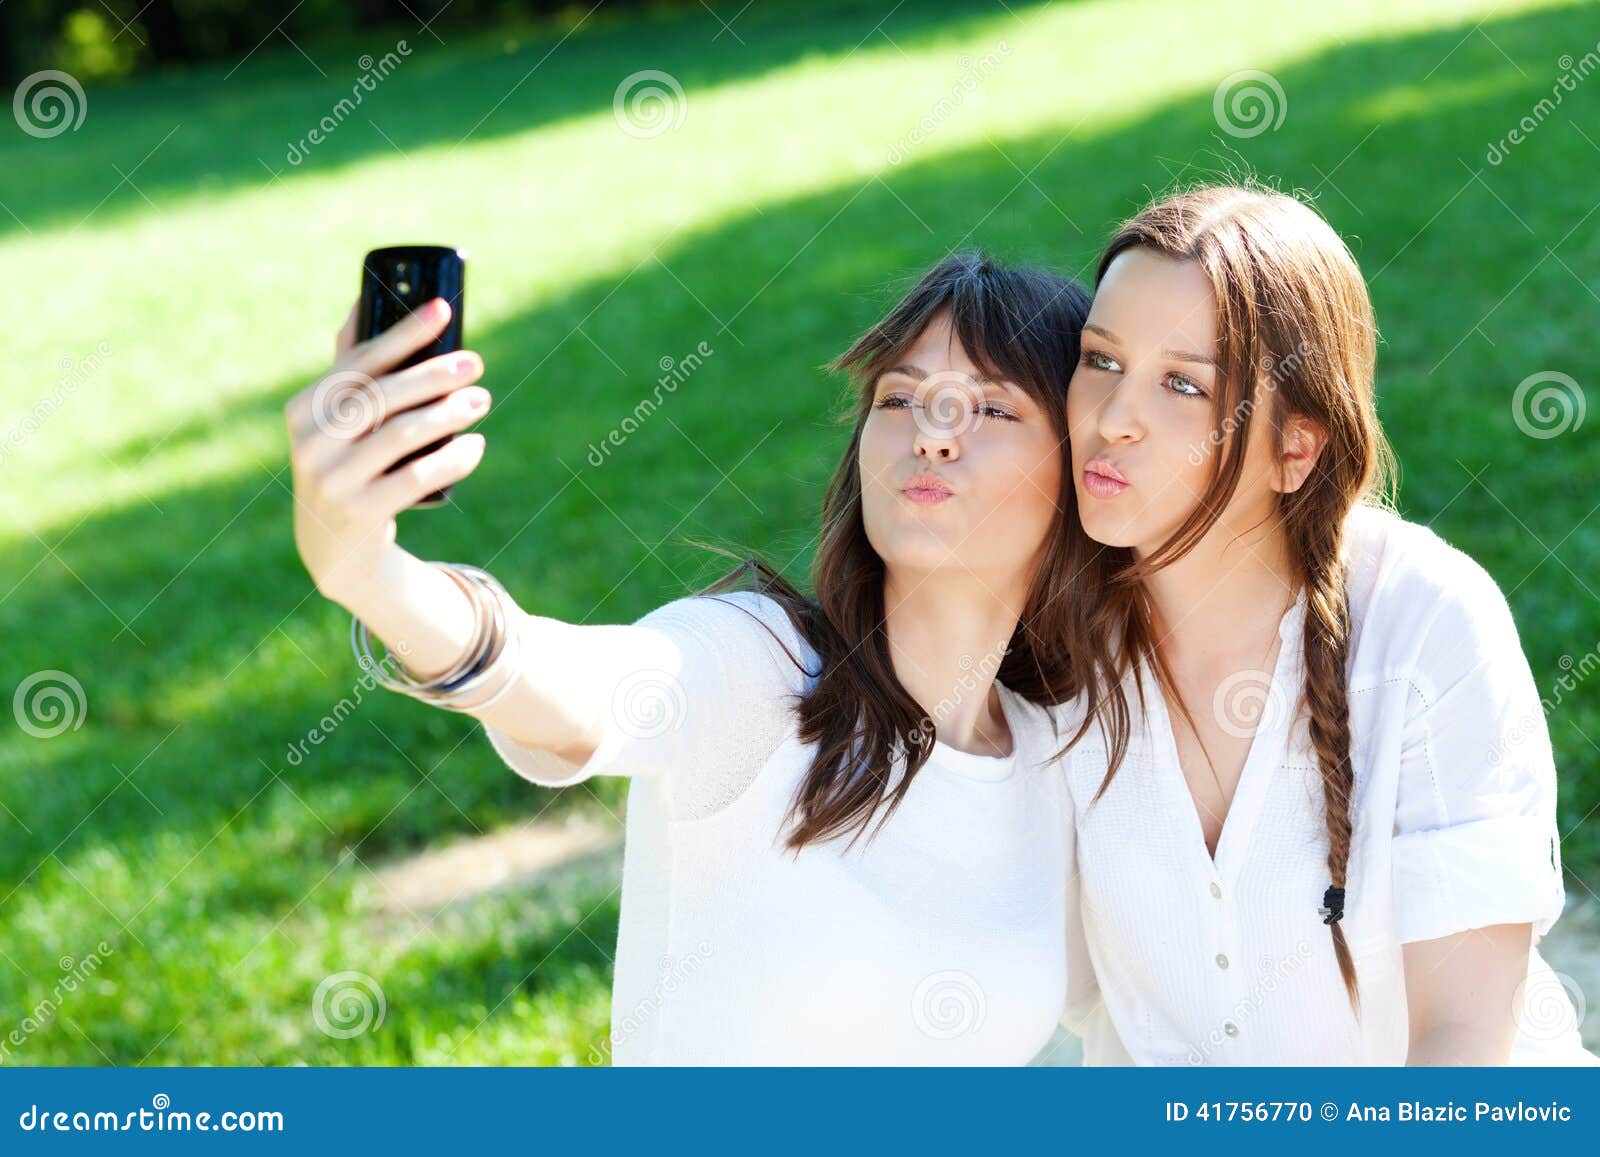 Taking selfie stock photo. Image of hipster, lifestyle - 41756770